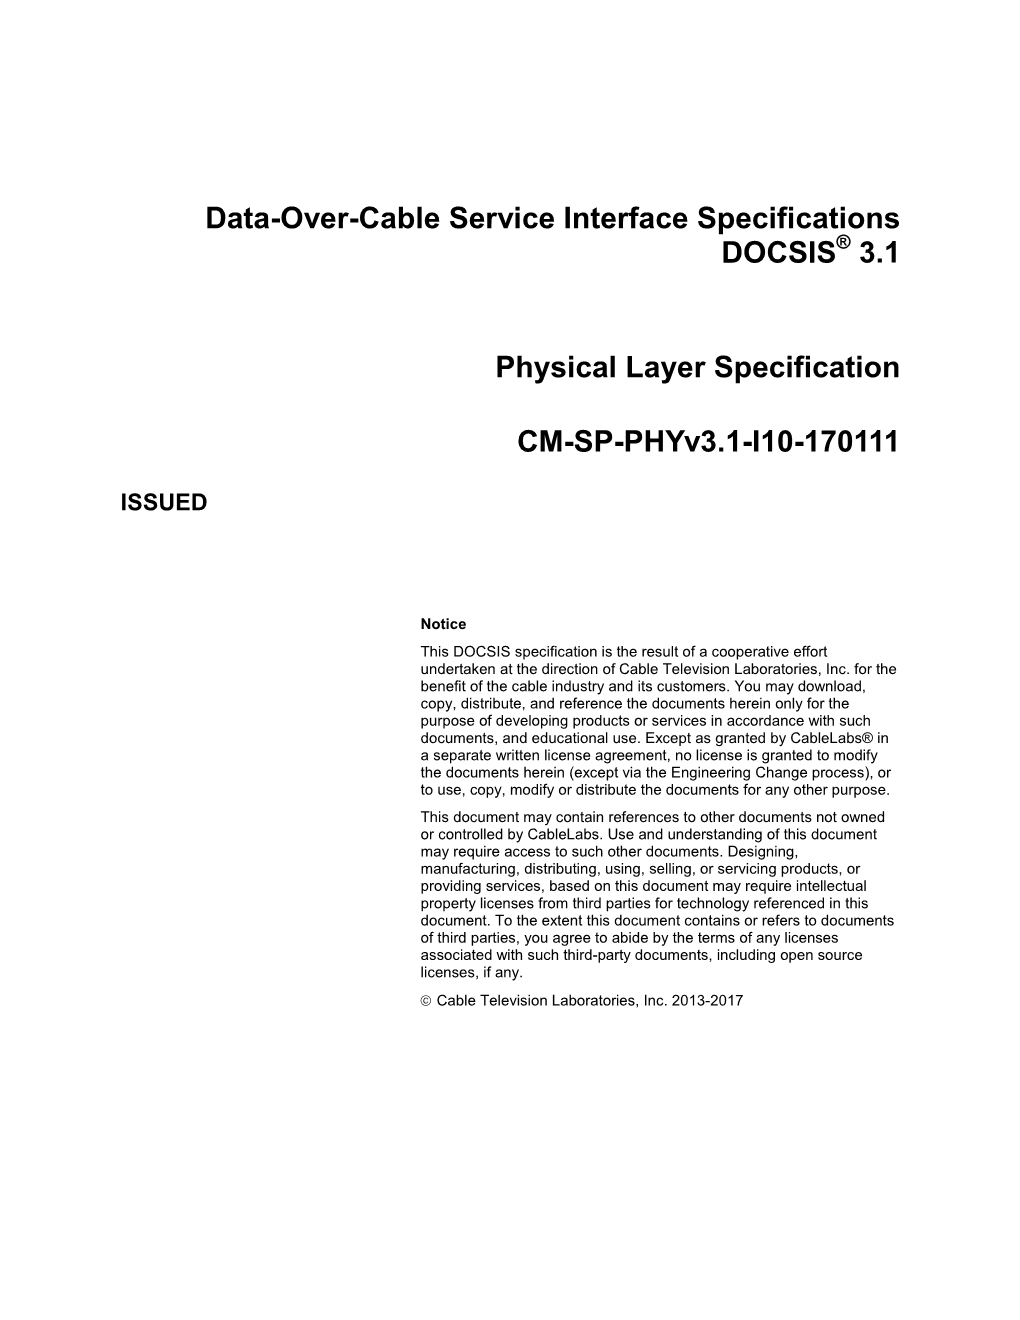 DOCSIS 3.1 Physical Layer Specification